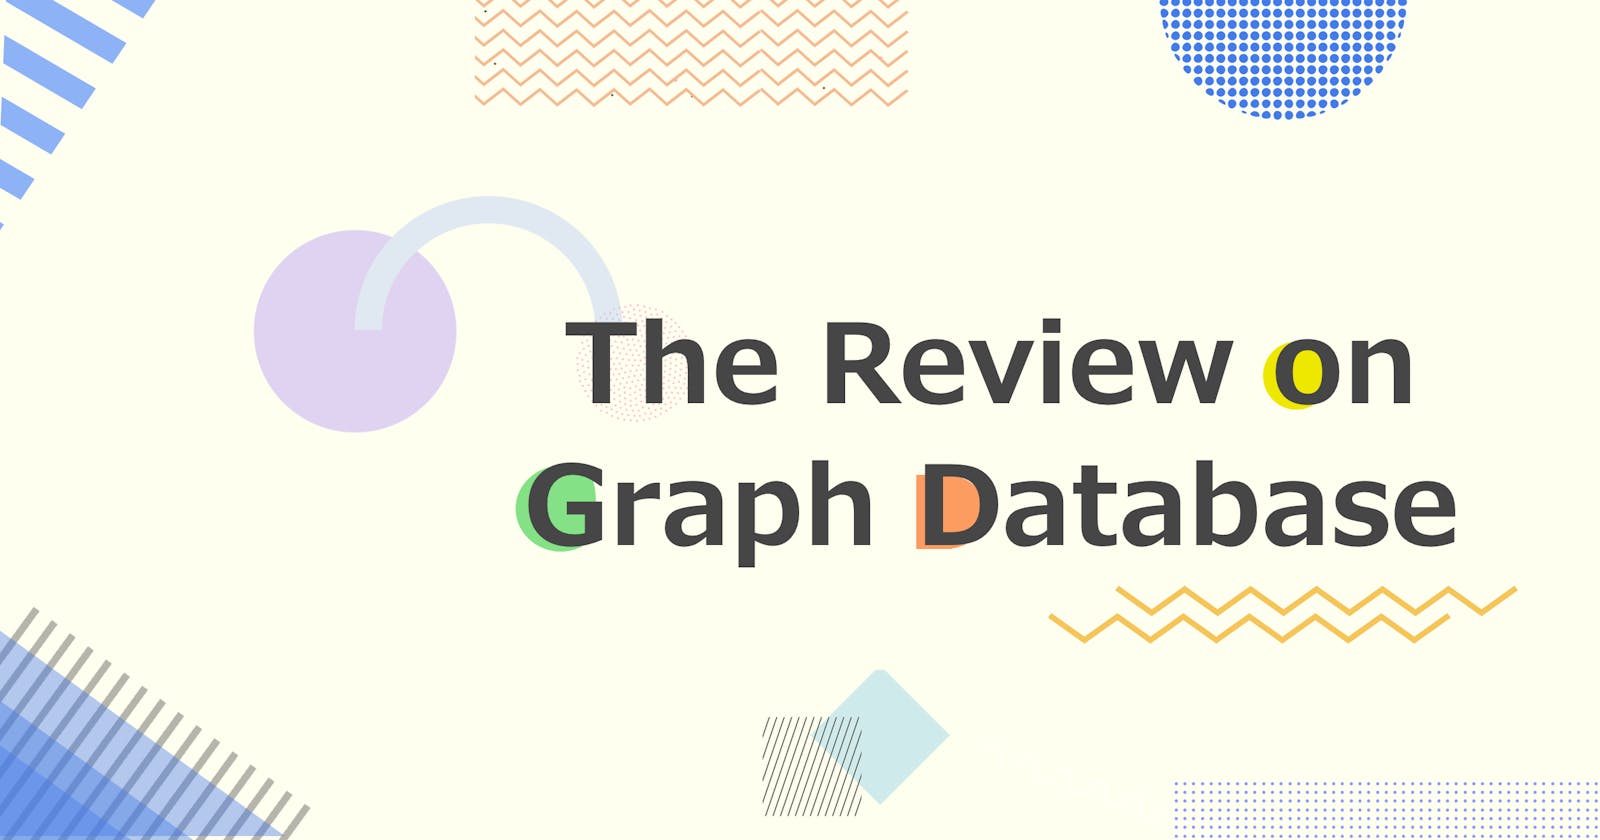 The Review on Graph Databases